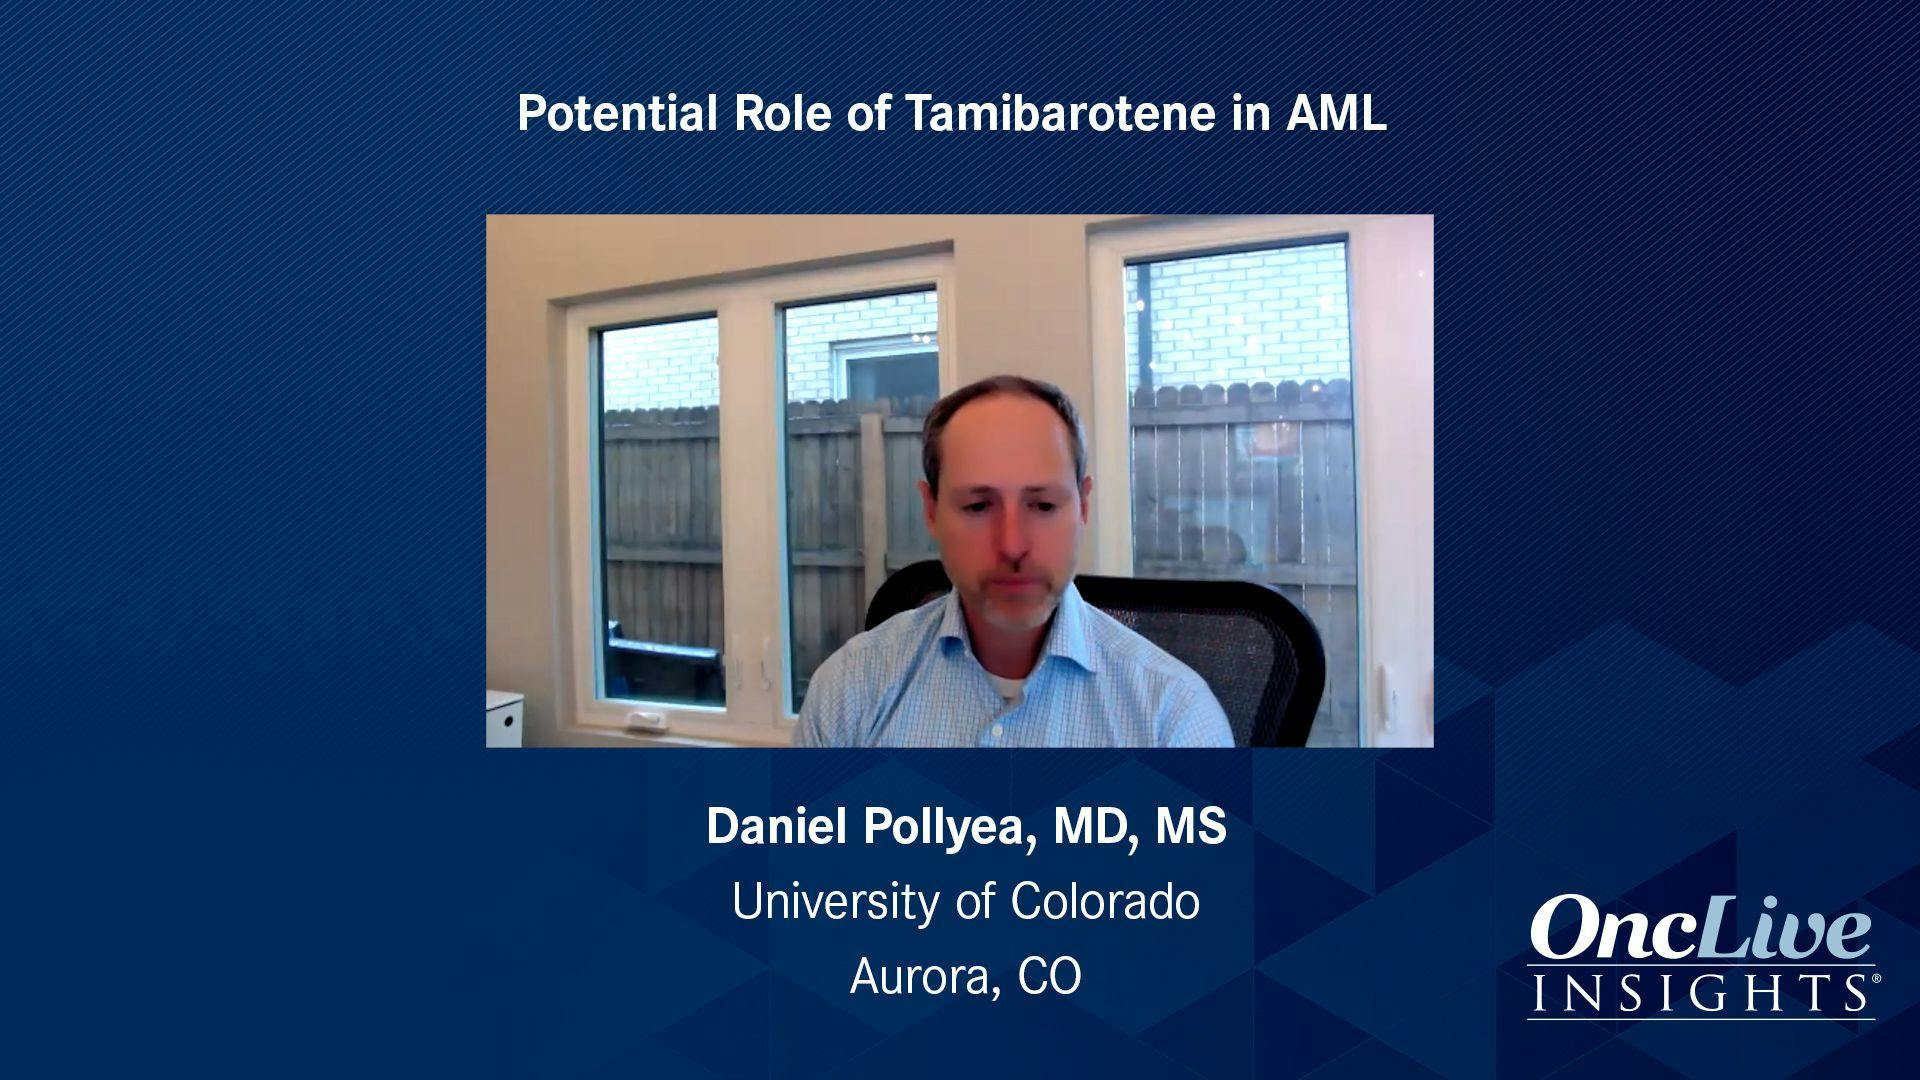 Treatment Options for Patients with Newly Diagnosed Acute Myeloid Leukemia (AML)